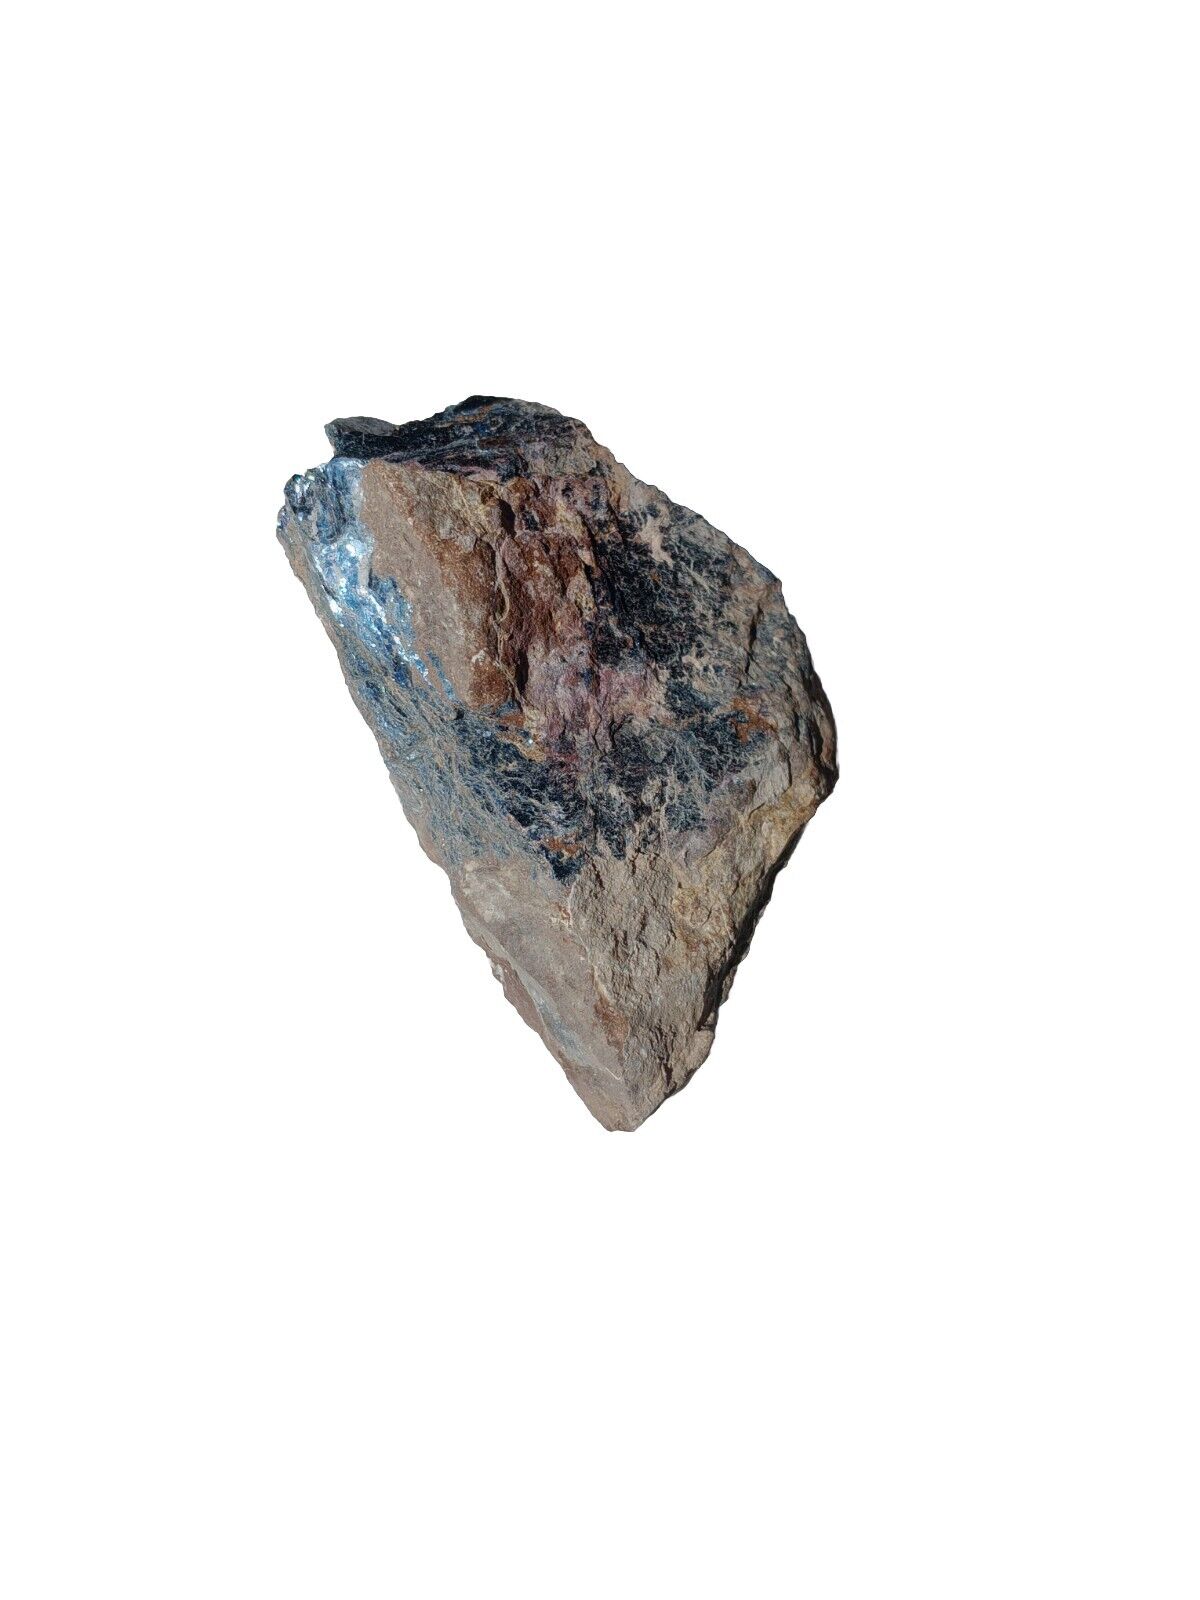 Extremely Rare Specular Hematite Extracted In The Sapphire Mountains, Montana 